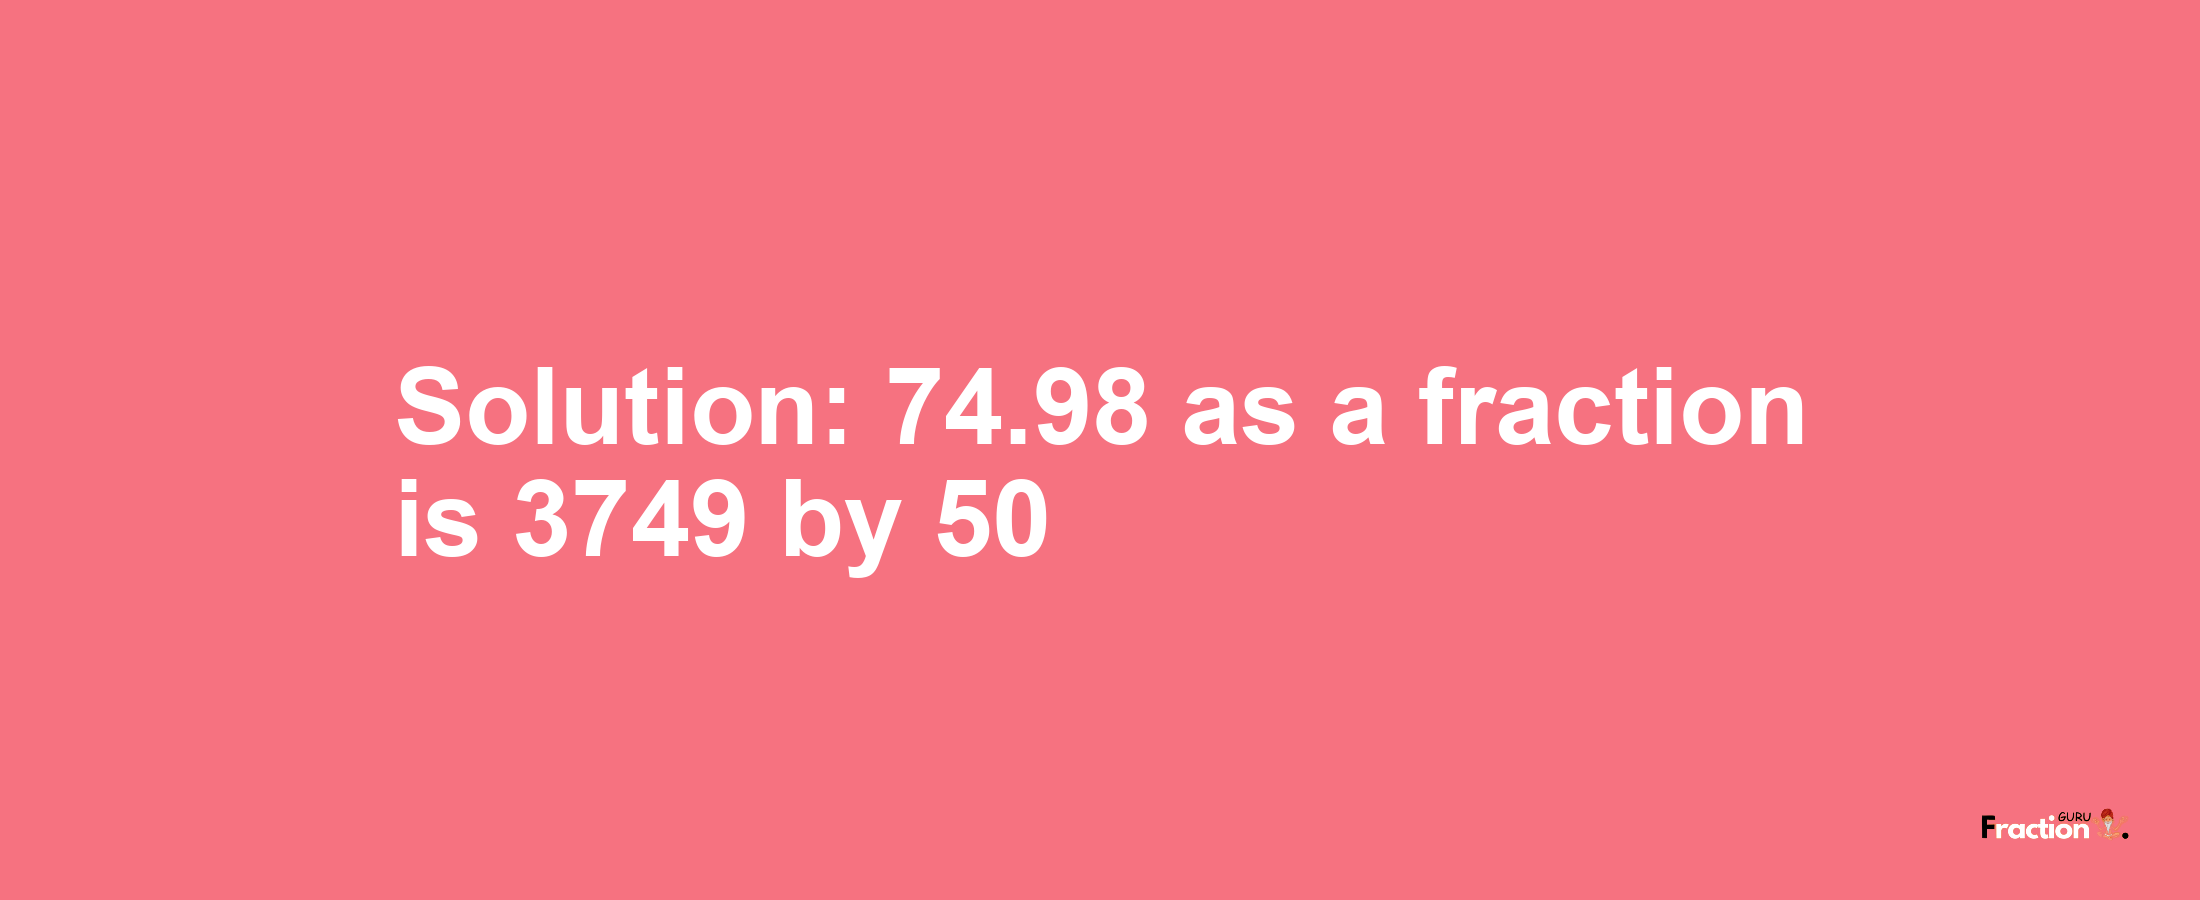 Solution:74.98 as a fraction is 3749/50